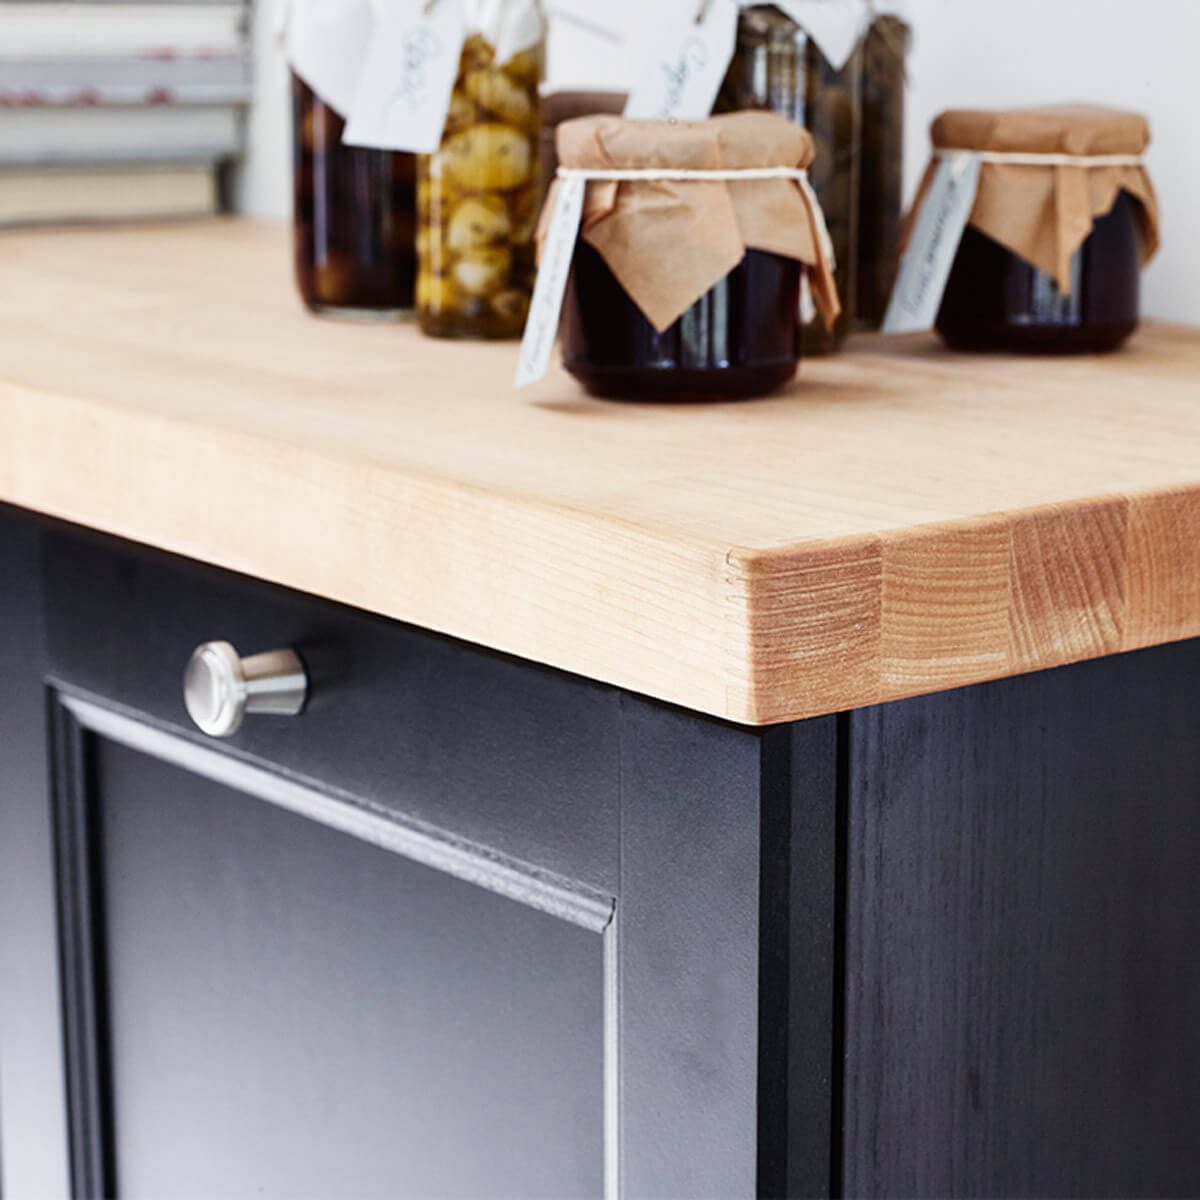 13 Awesome Countertops That Aren't Granite